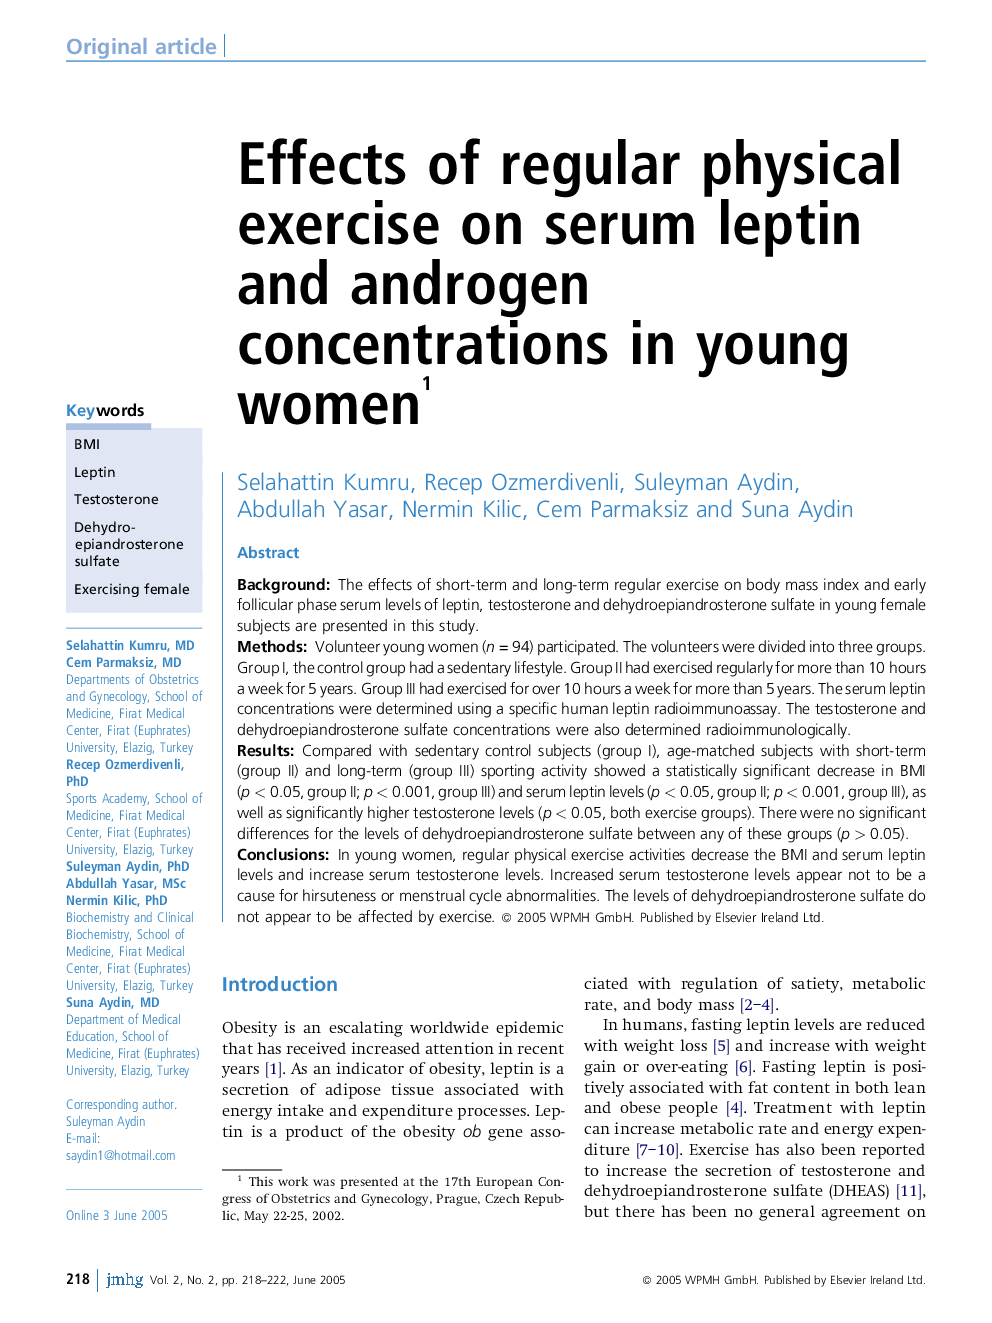 Effects of regular physical exercise on serum leptin and androgen concentrations in young women